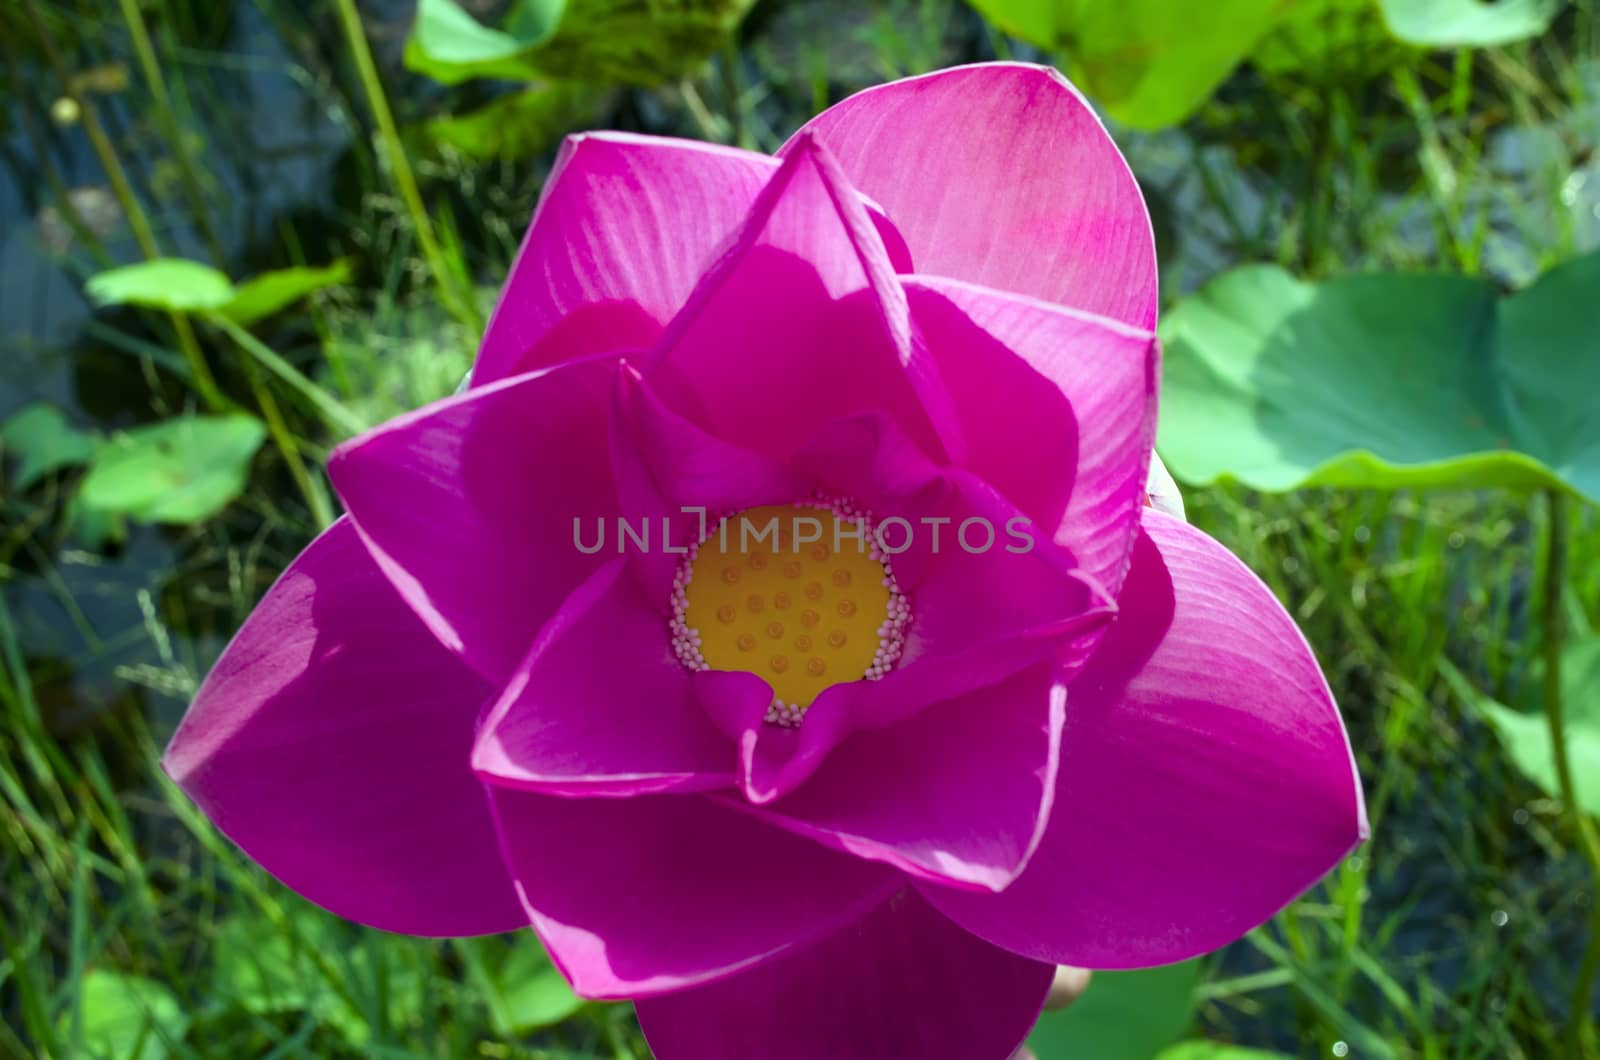 Nelumbo is genus of aquatic plants with large, showy flowers resembling water lily.